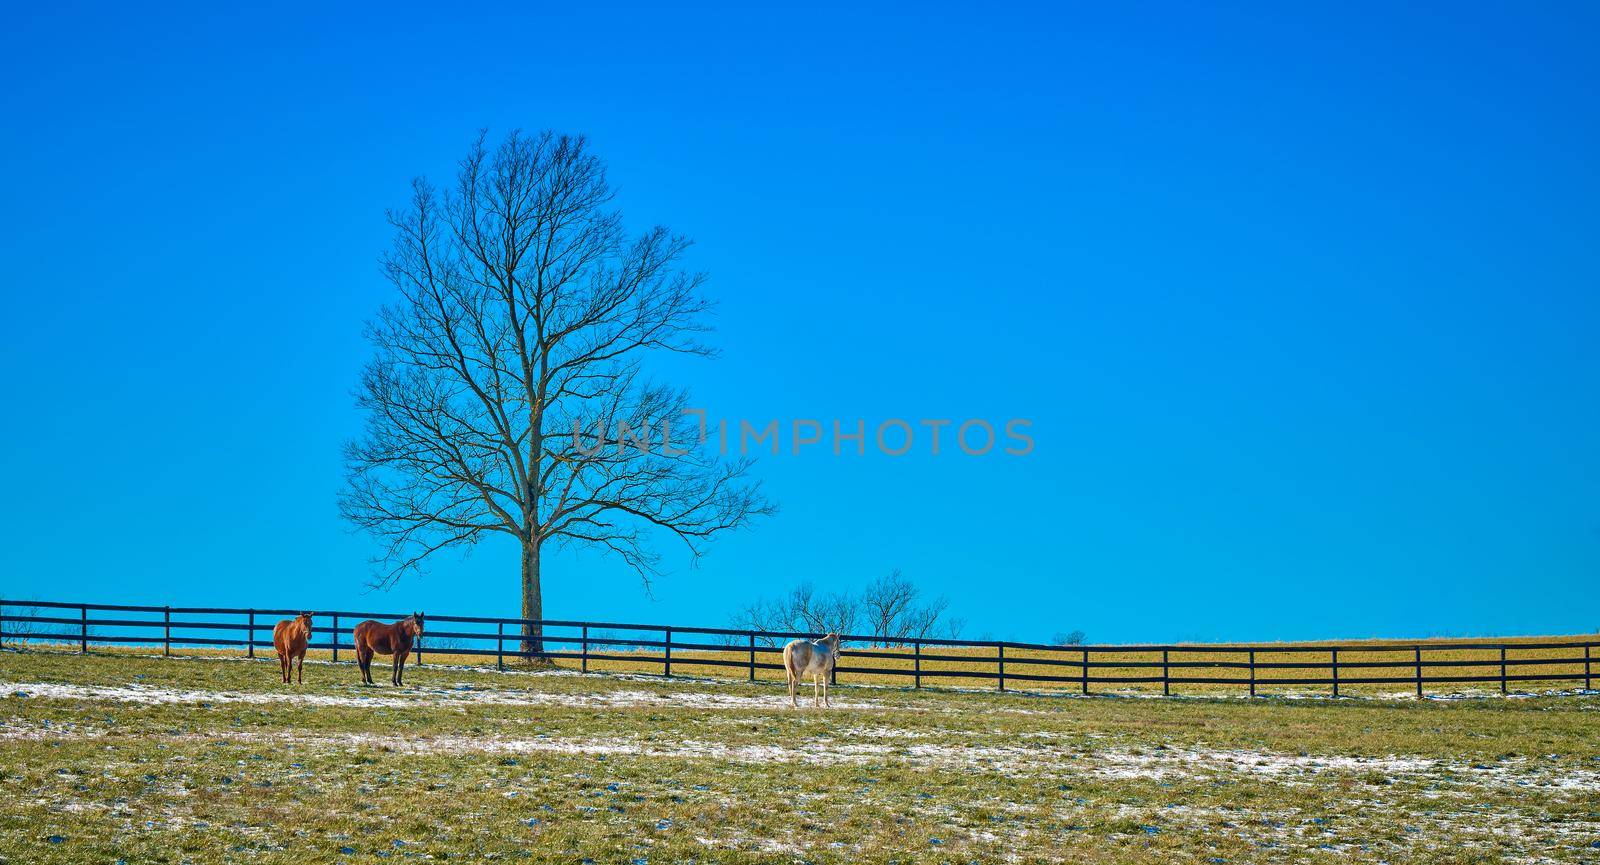 Three horses in a field by a tree against blue sky. by patrickstock